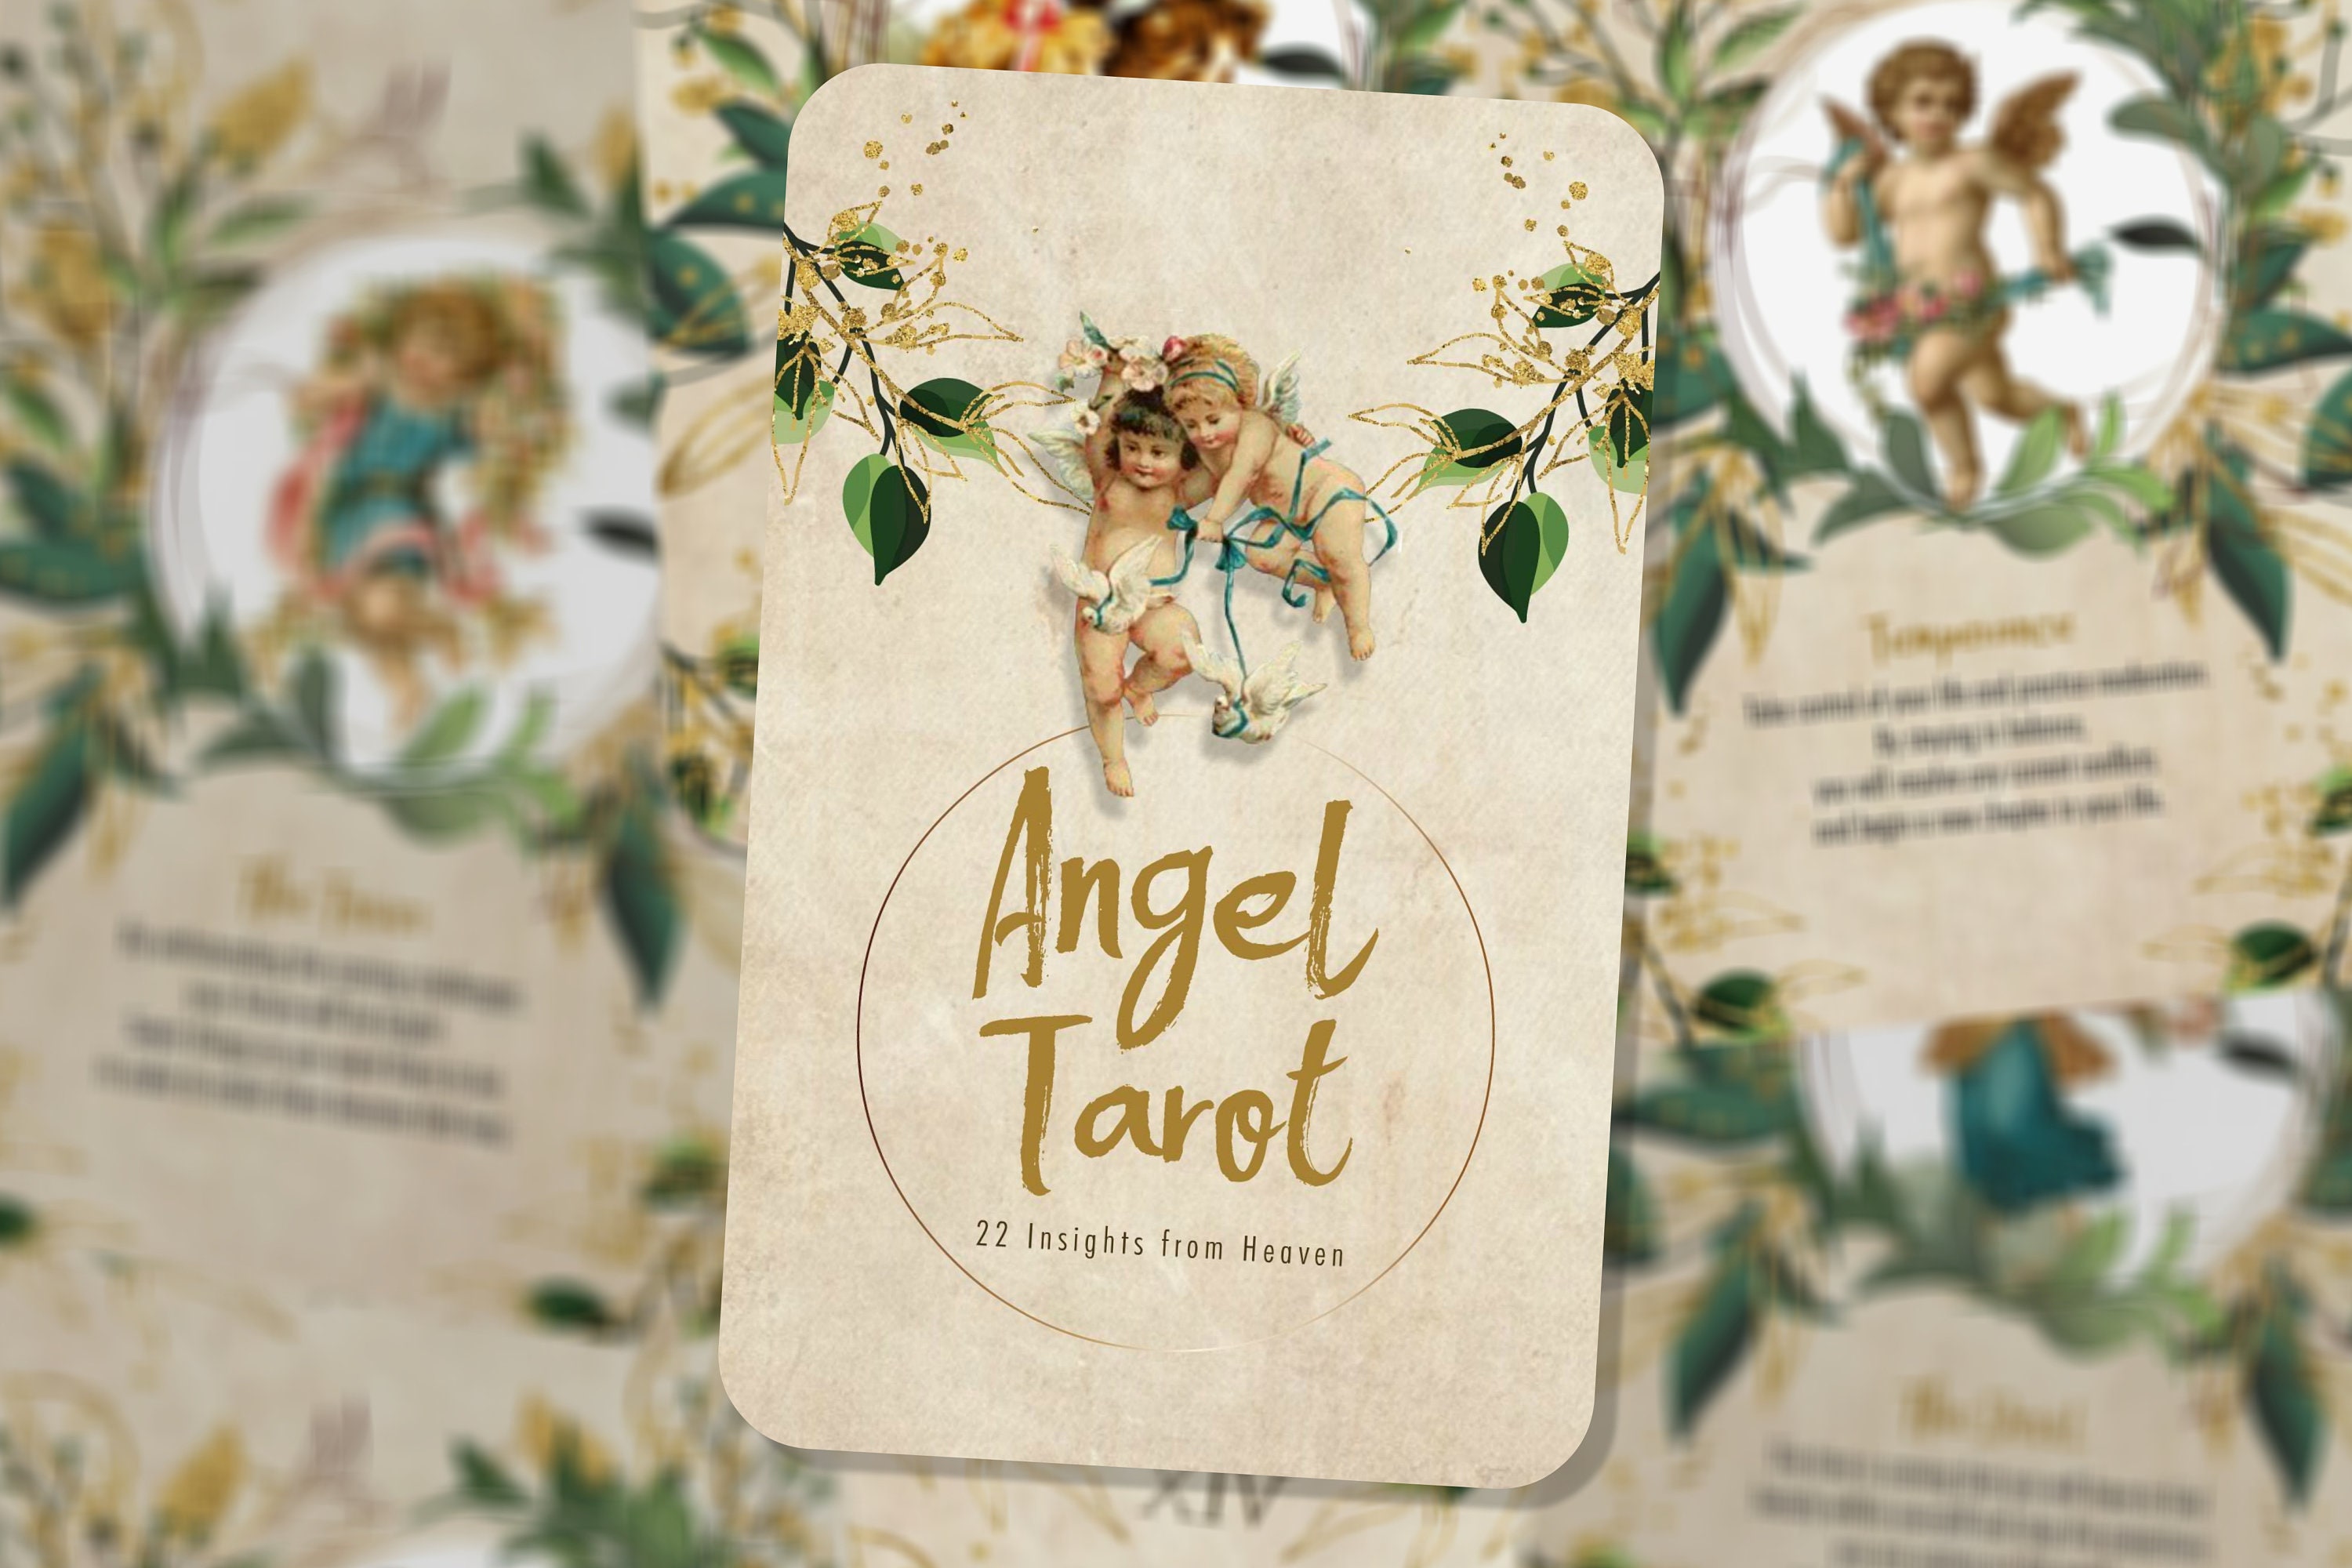 Angelic Mystery Box ($58+ value) – Angelic Action